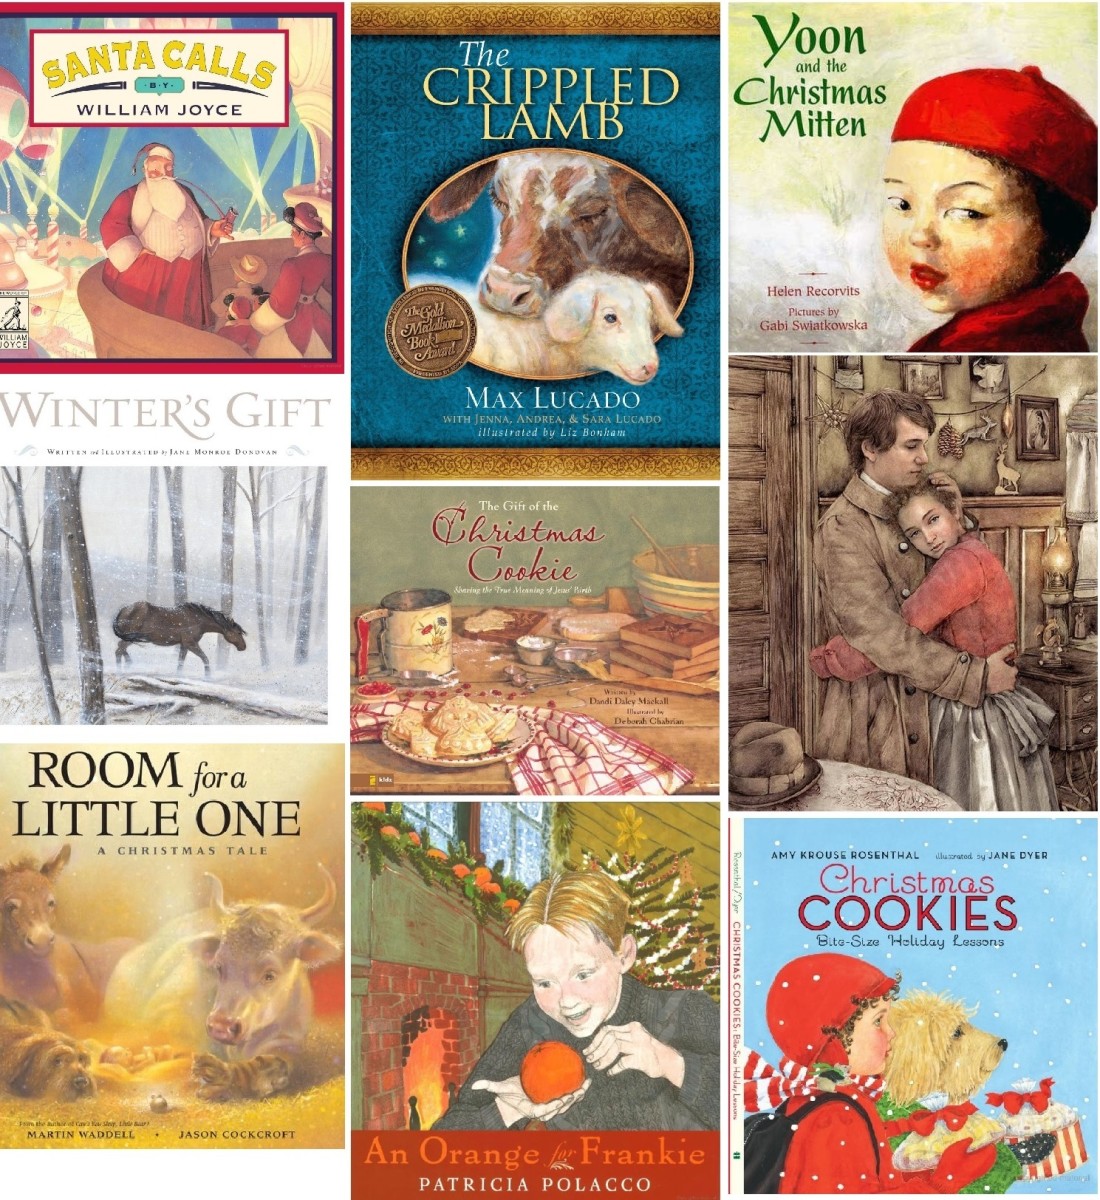 Some of my favorite children's picture books. Not pictured: King of Kings by Susan Hill.